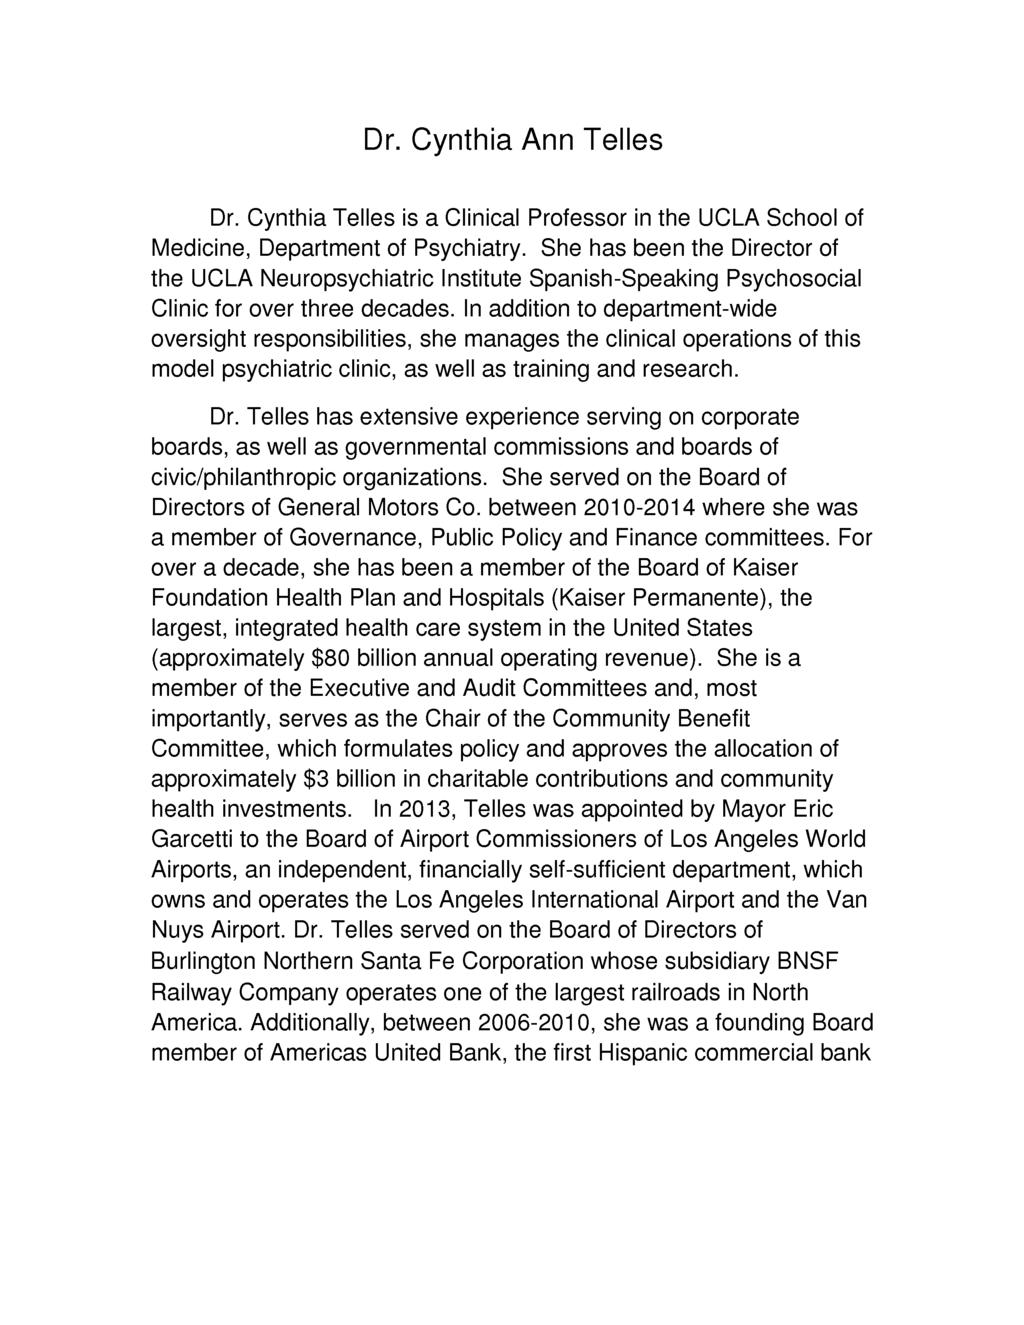 Dr. Cynthia Ann Telles Dr. Cynthia Telles is a Clinical Professor in the UCLA School of Medicine, Department of Psychiatry.